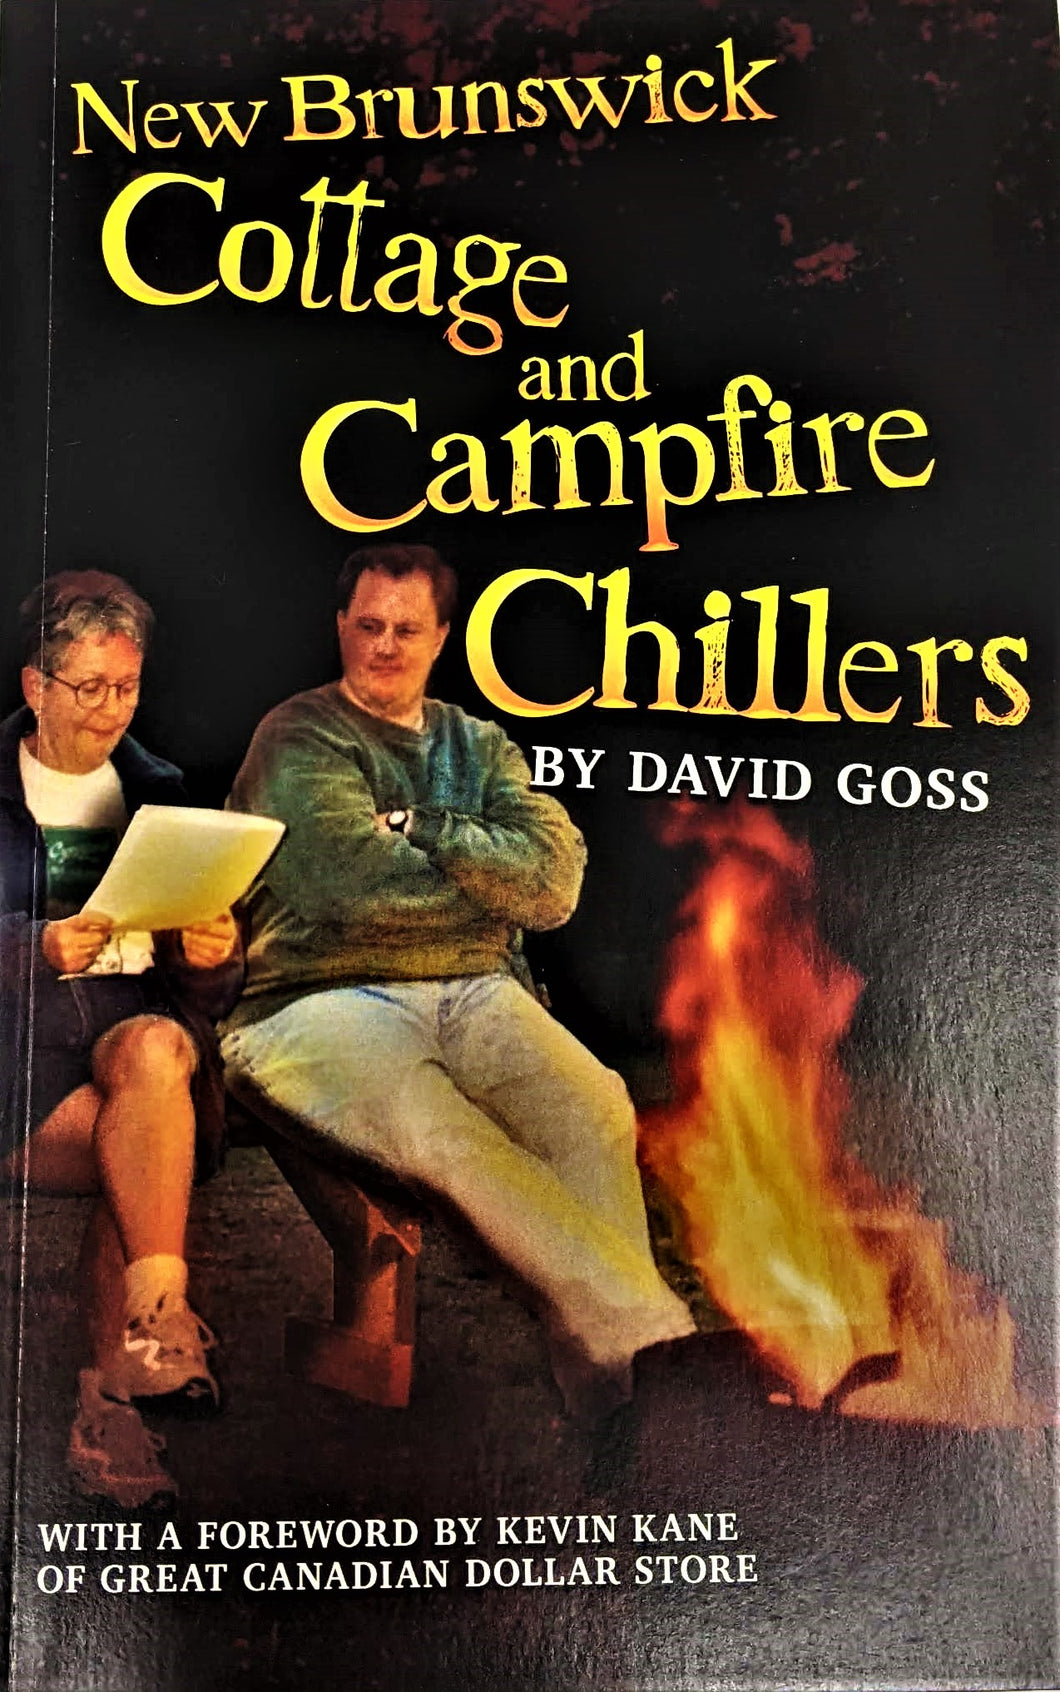 New Brunswick Cottage and Campfire Chillers